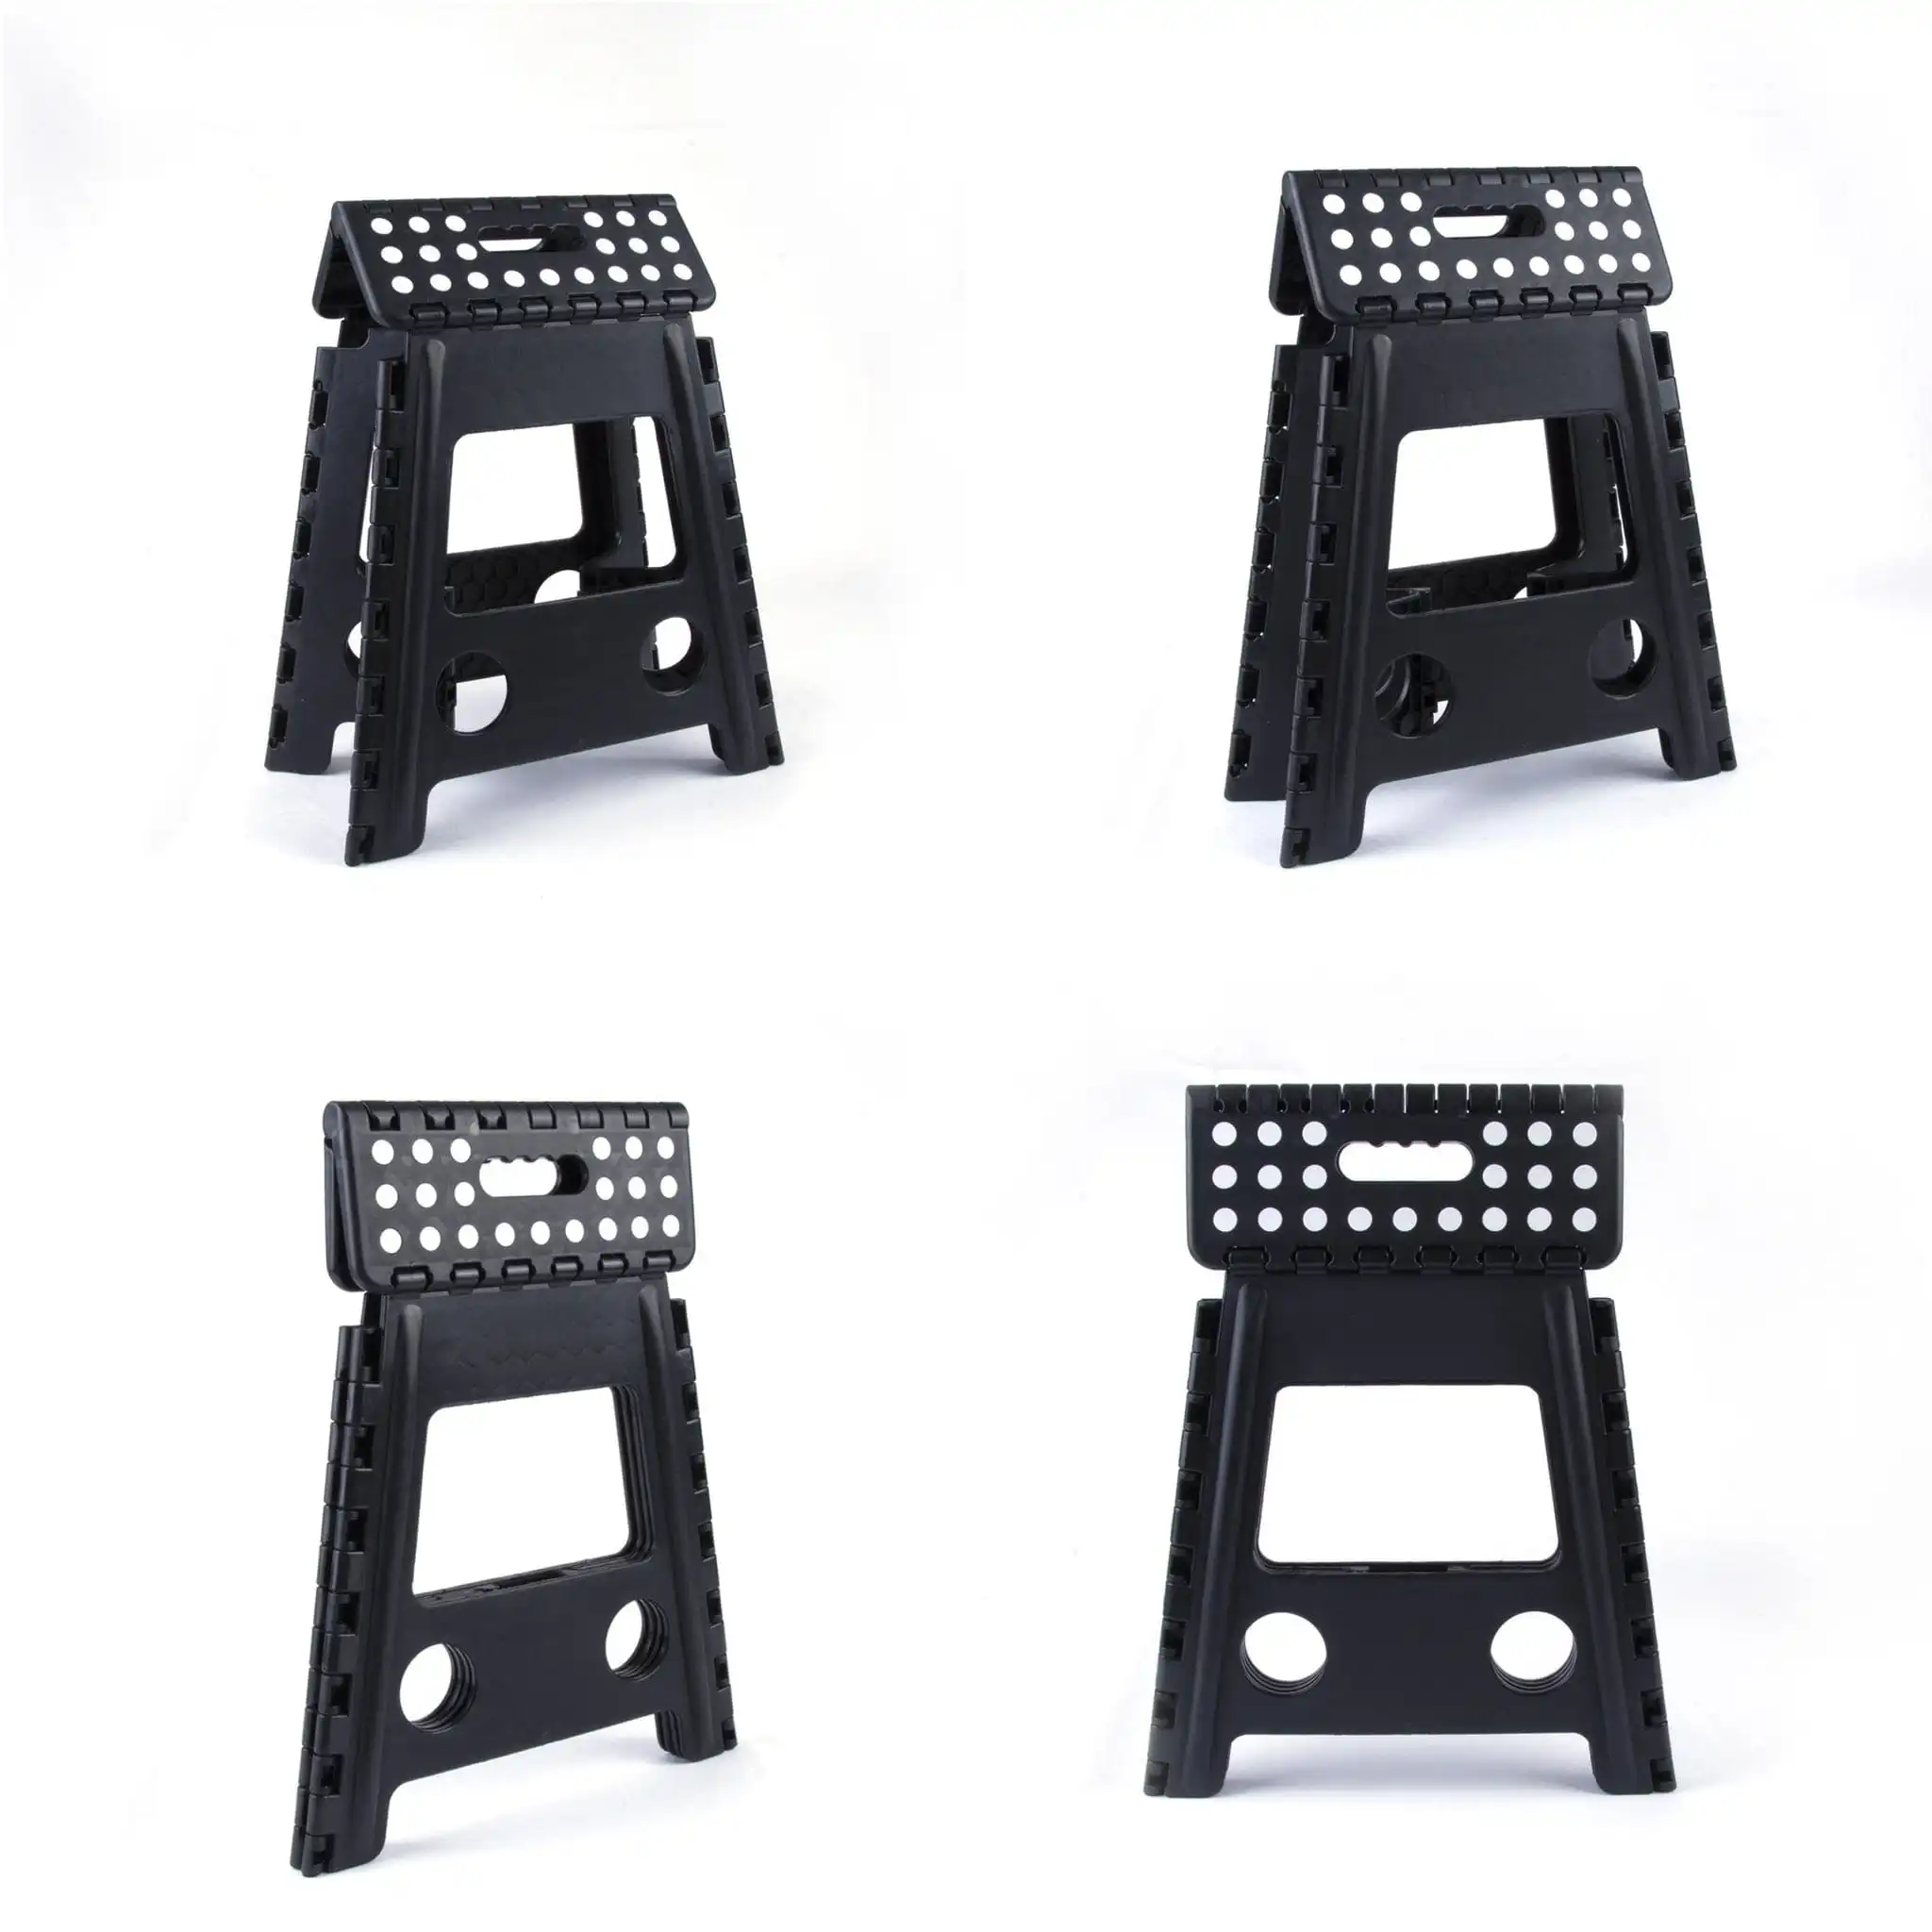 Large Plastic Folding Stool Portable Chair Store Flat Easy Carry Outdoor Camping Black